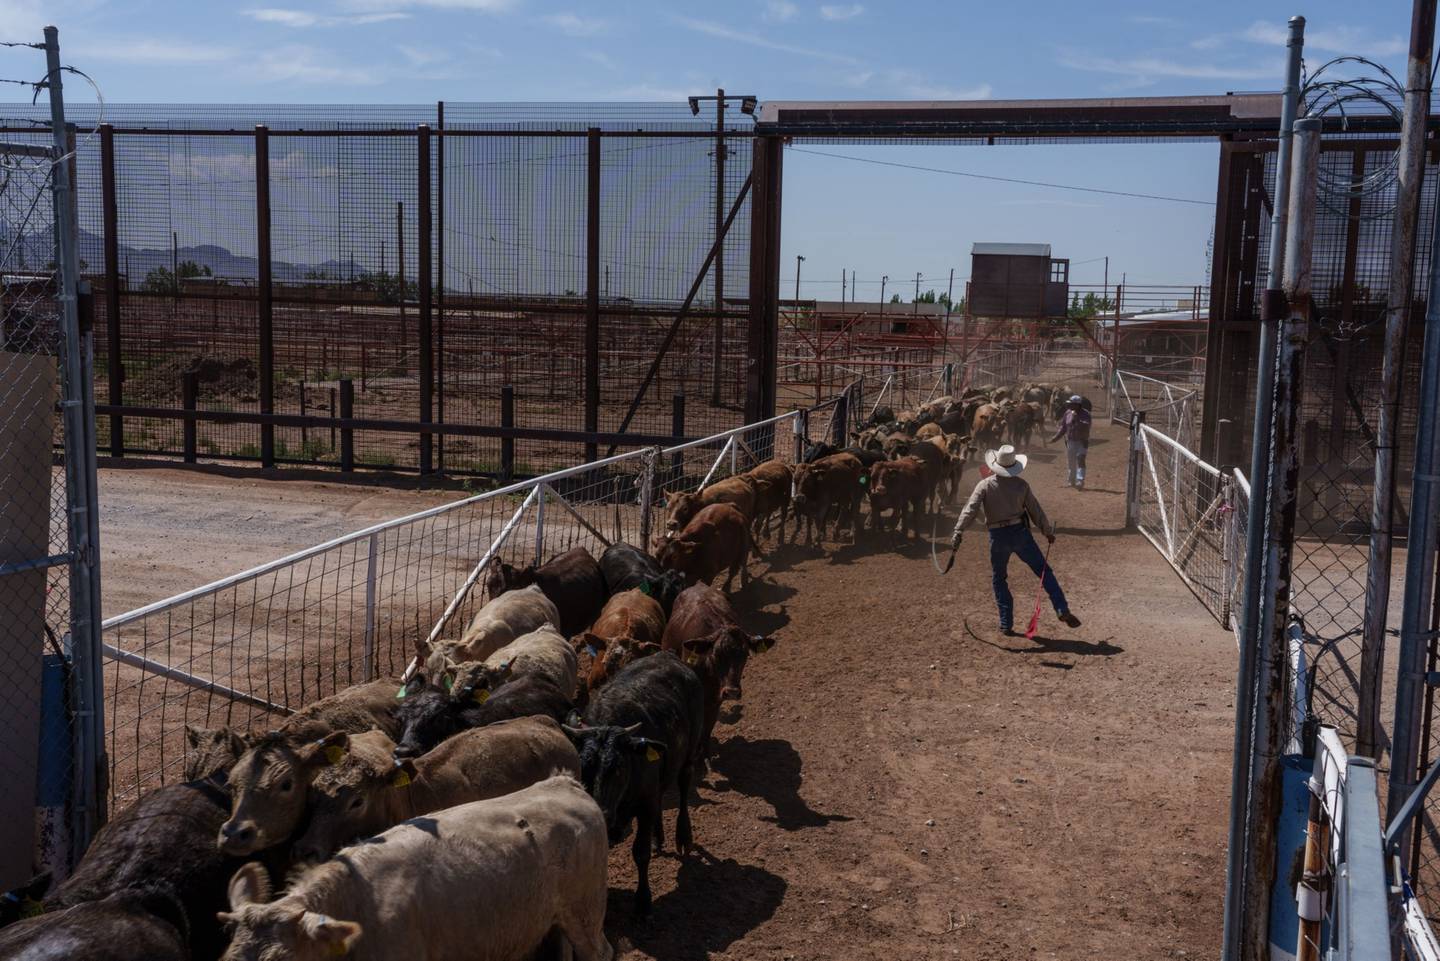 Cattle enter the United States from Mexico at the Santa Teresa International Export/Import Livestock Crossing in Santa Teresa, New Mexico on Tuesday, August 9, 2022. The location is the busiest on the U.S.-Mexico border, crossing more head than anywhere else.dfd